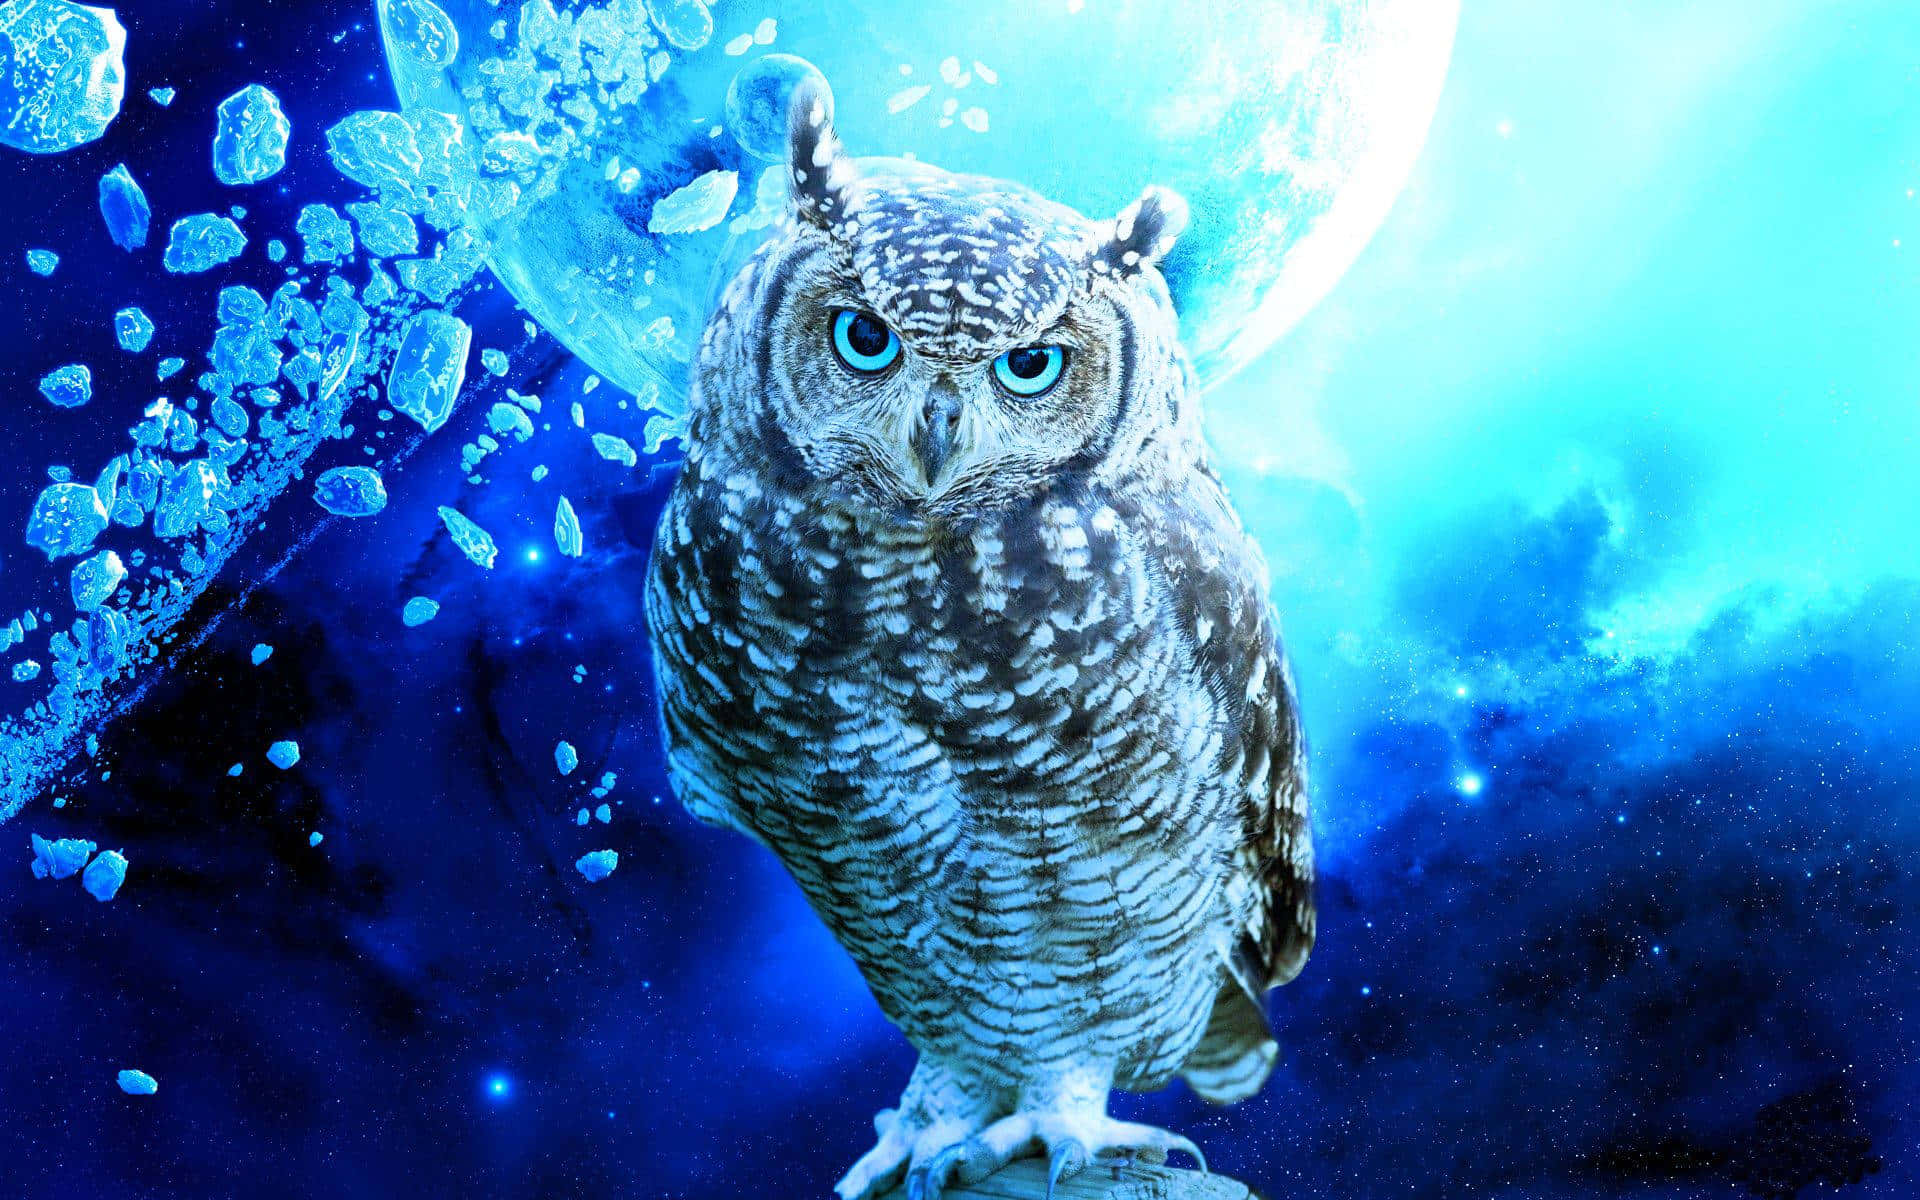 Don’t be fooled by its cute looks, this blue owl is a mighty hunter